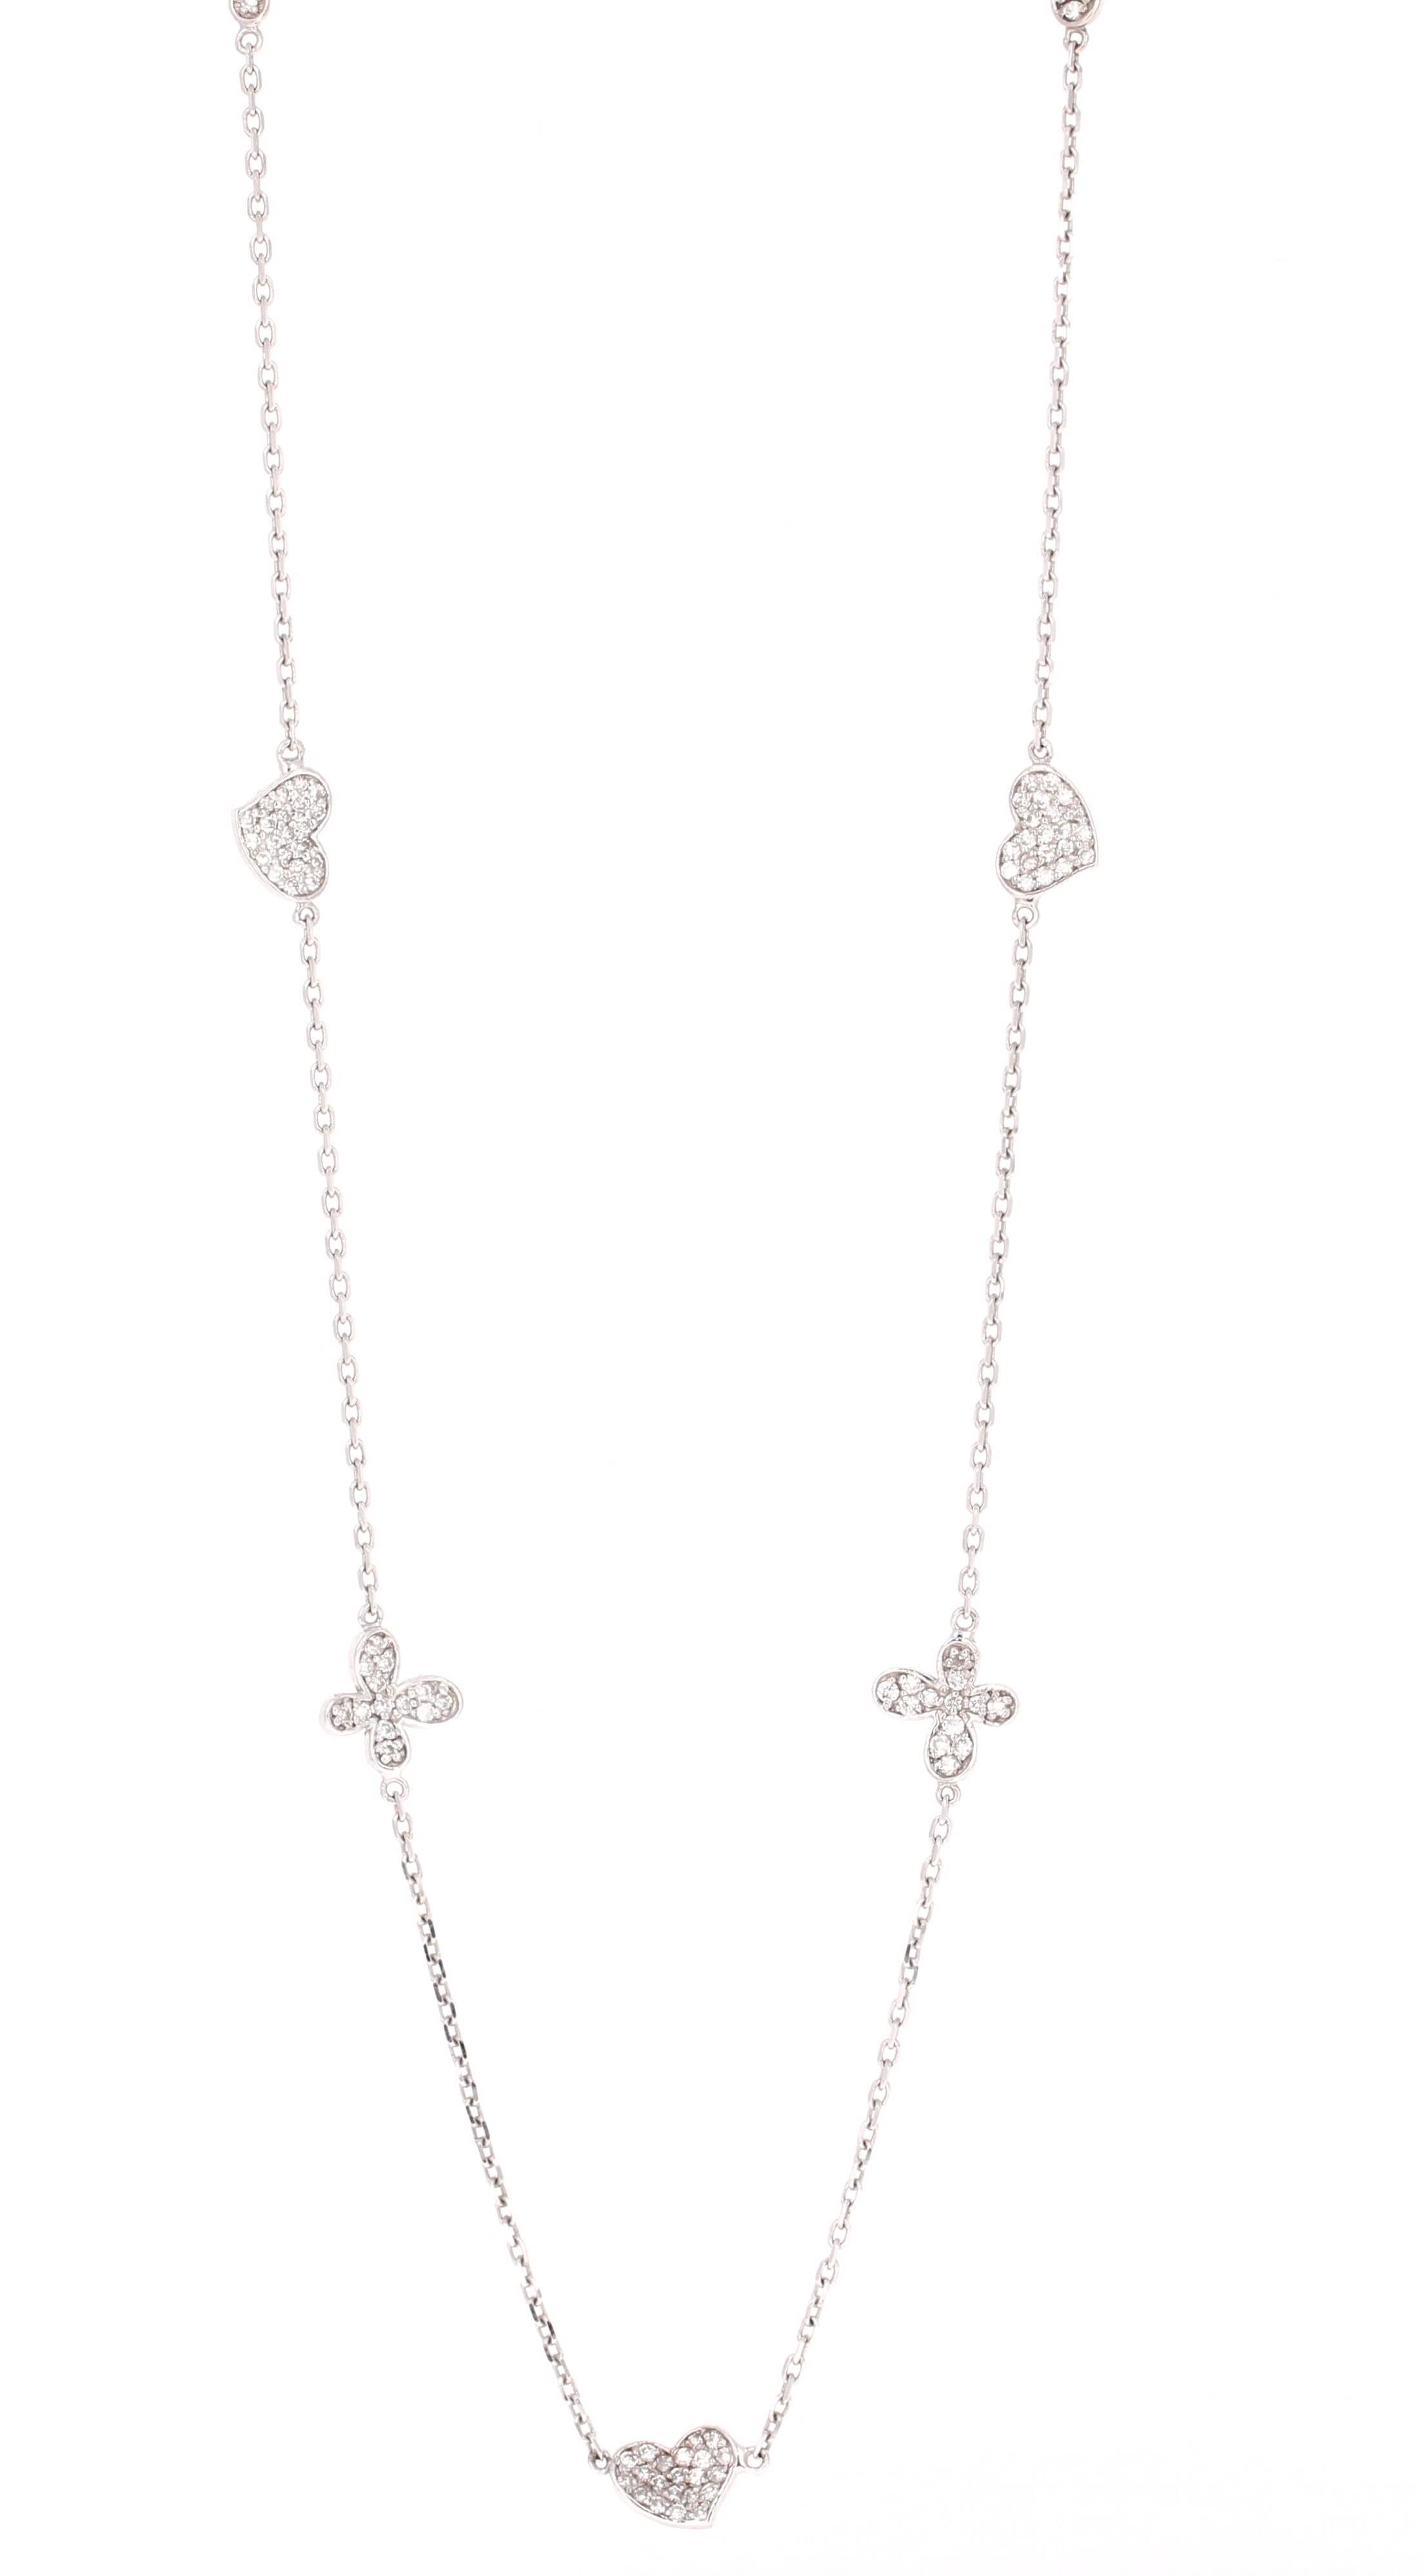 This cute and dainty necklace is so versatile that it can elevate the look of any ensemble and would be a great addition to your accessory collection. It has 143 Round Cut Diamonds that weigh 0.75 carats. The Clarity of the diamonds is SI1 and the